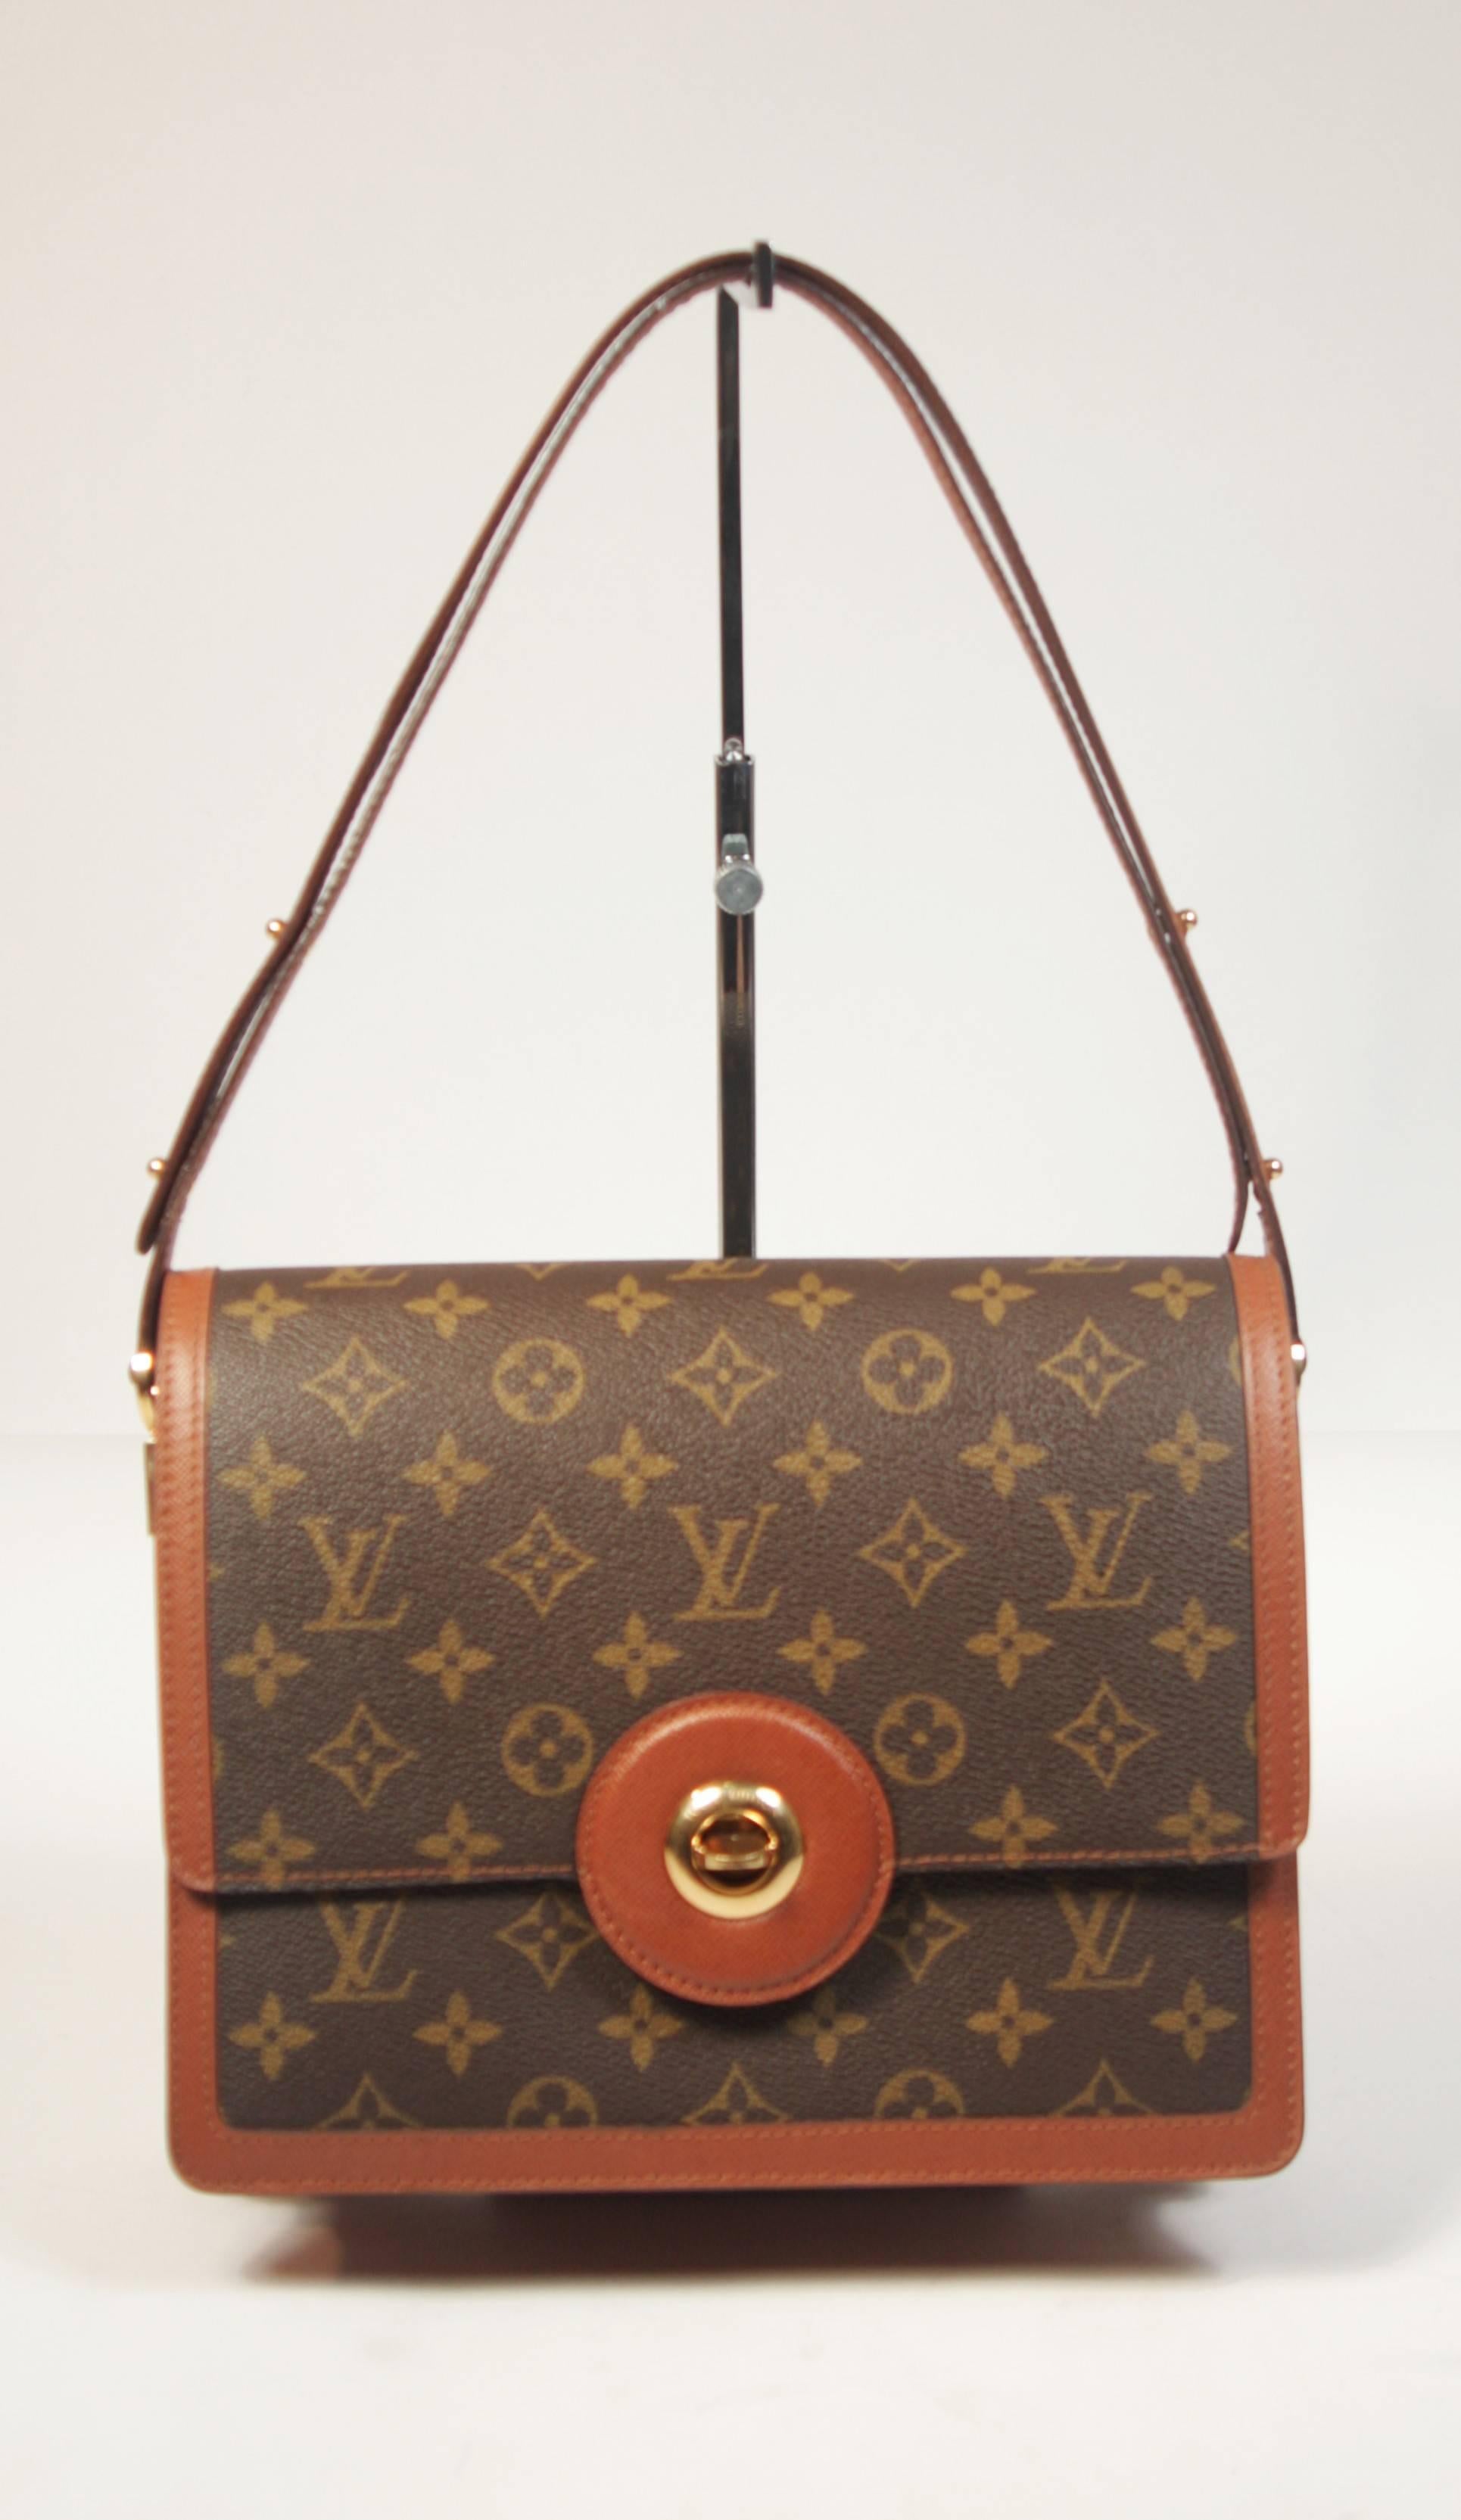 This Louis Vuitton design is available for viewing at our Beverly Hills Boutique. We offer a large selection of evening gowns and luxury garments. 

 This handbag is composed of the classic Louis Vuitton monogram print and features a rich cognac